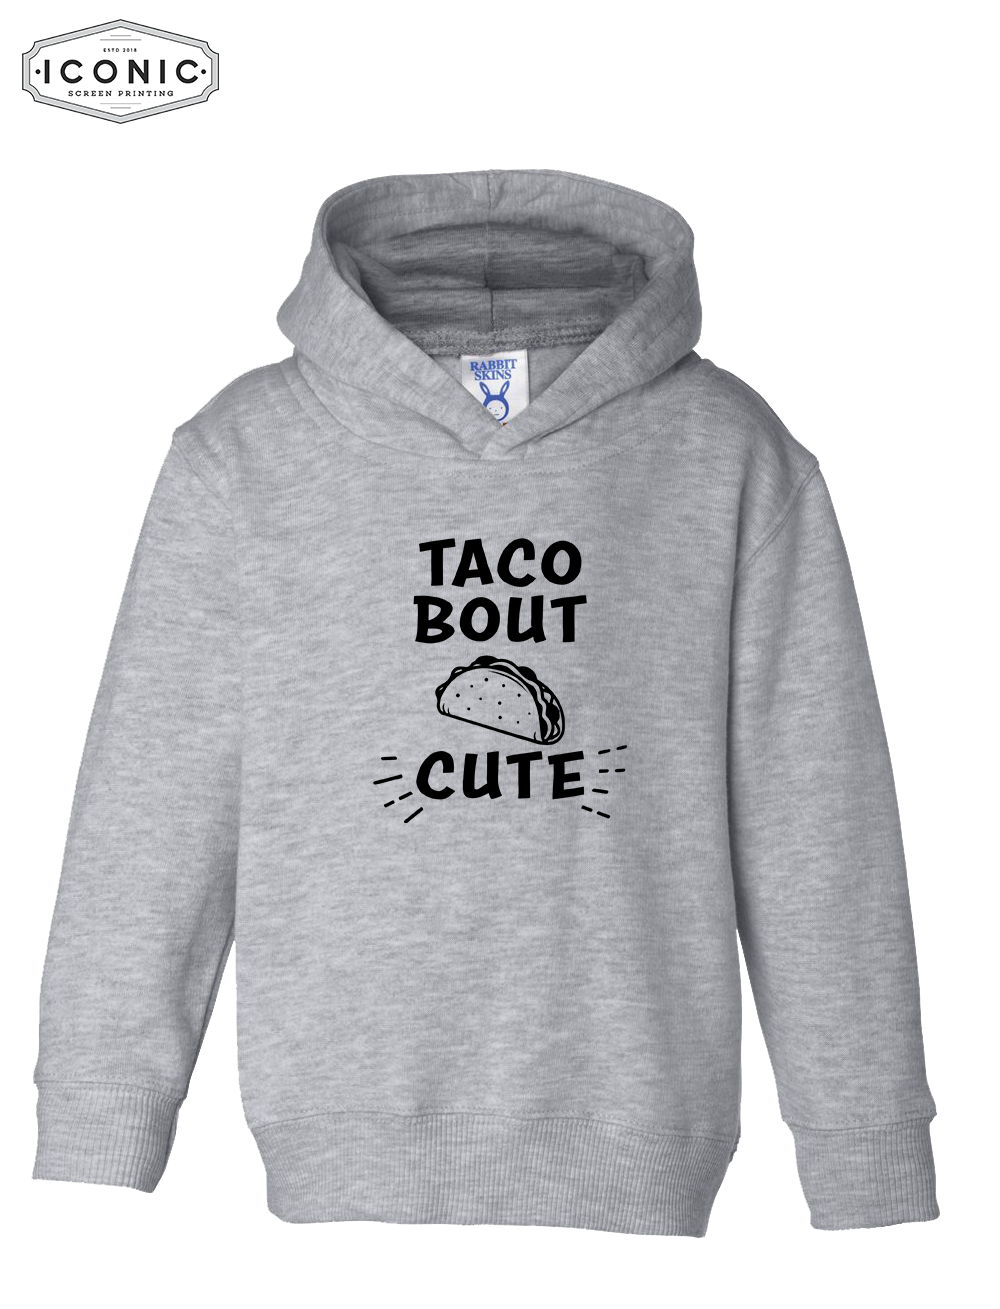 Tacobout Cute! - Toddler Pullover Fleece Hoodie